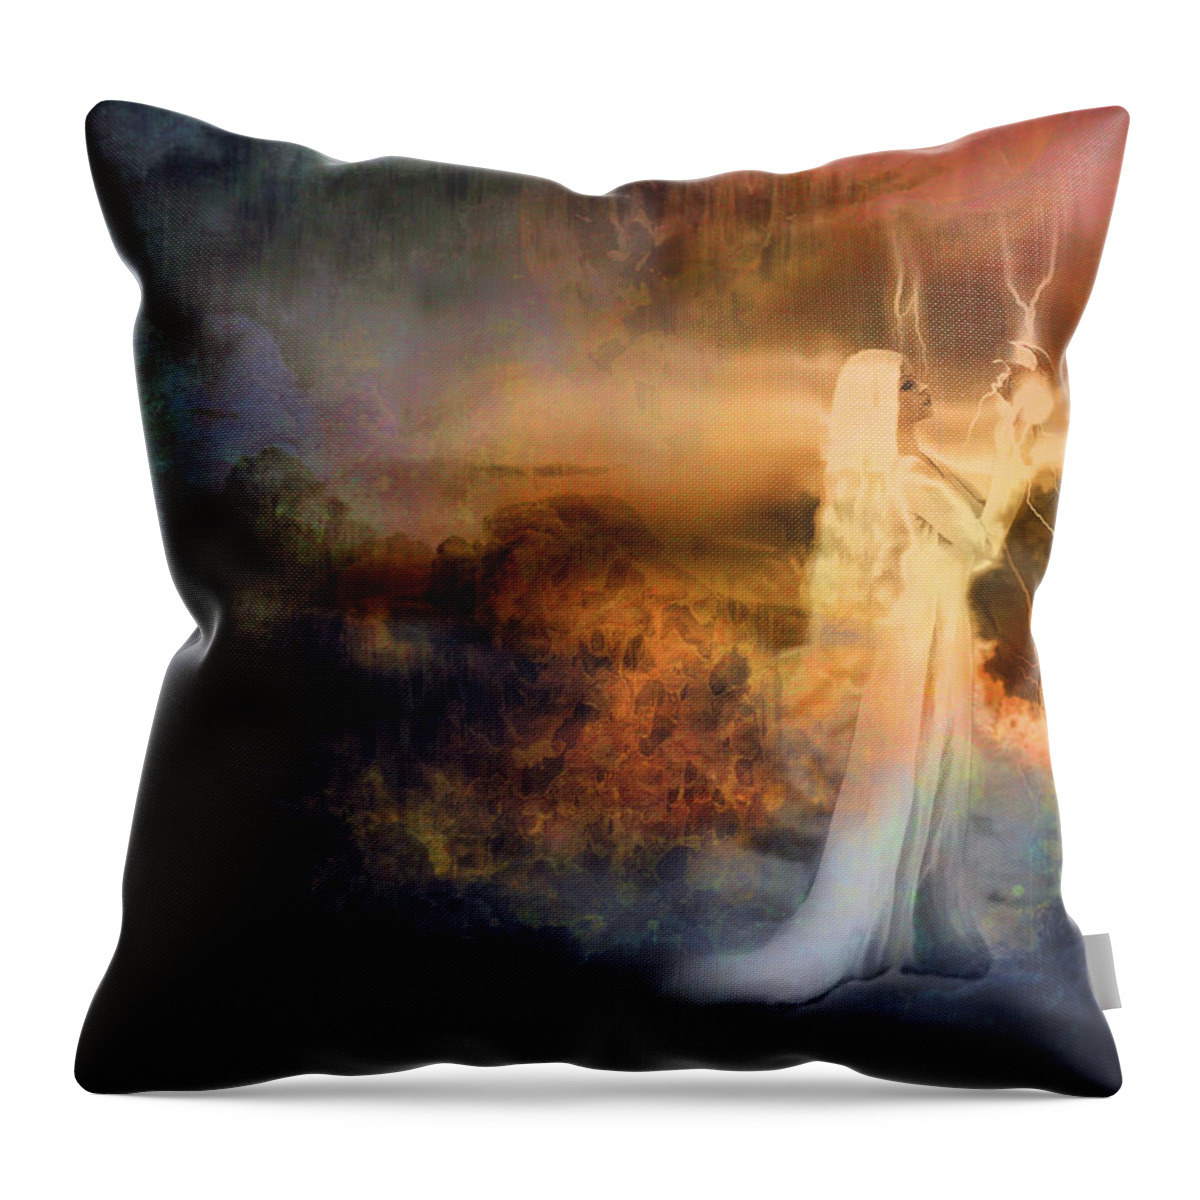 Mother Of Dragons Throw Pillow featuring the digital art Mother of Dragons by Lilia D